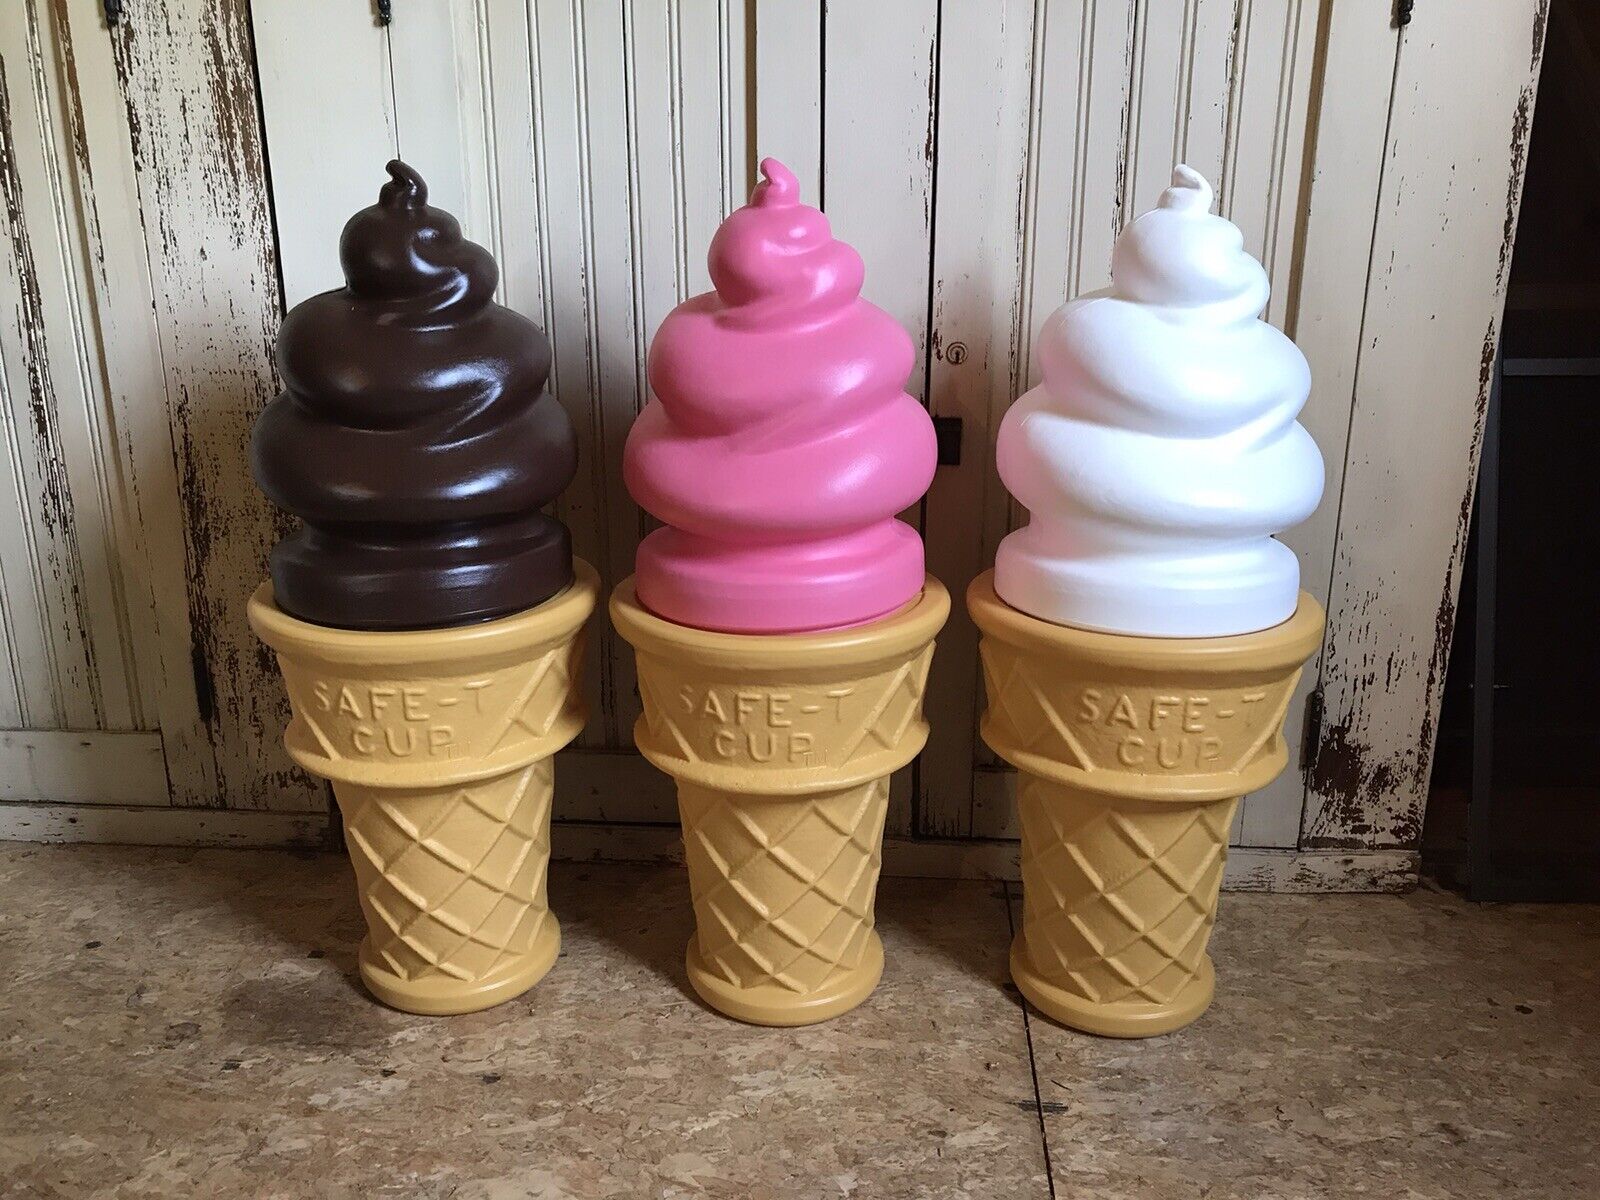 Blow Mold Giant Plastic Ice Cream Cone Displays Swirl Safe T Cup Lot Of 3